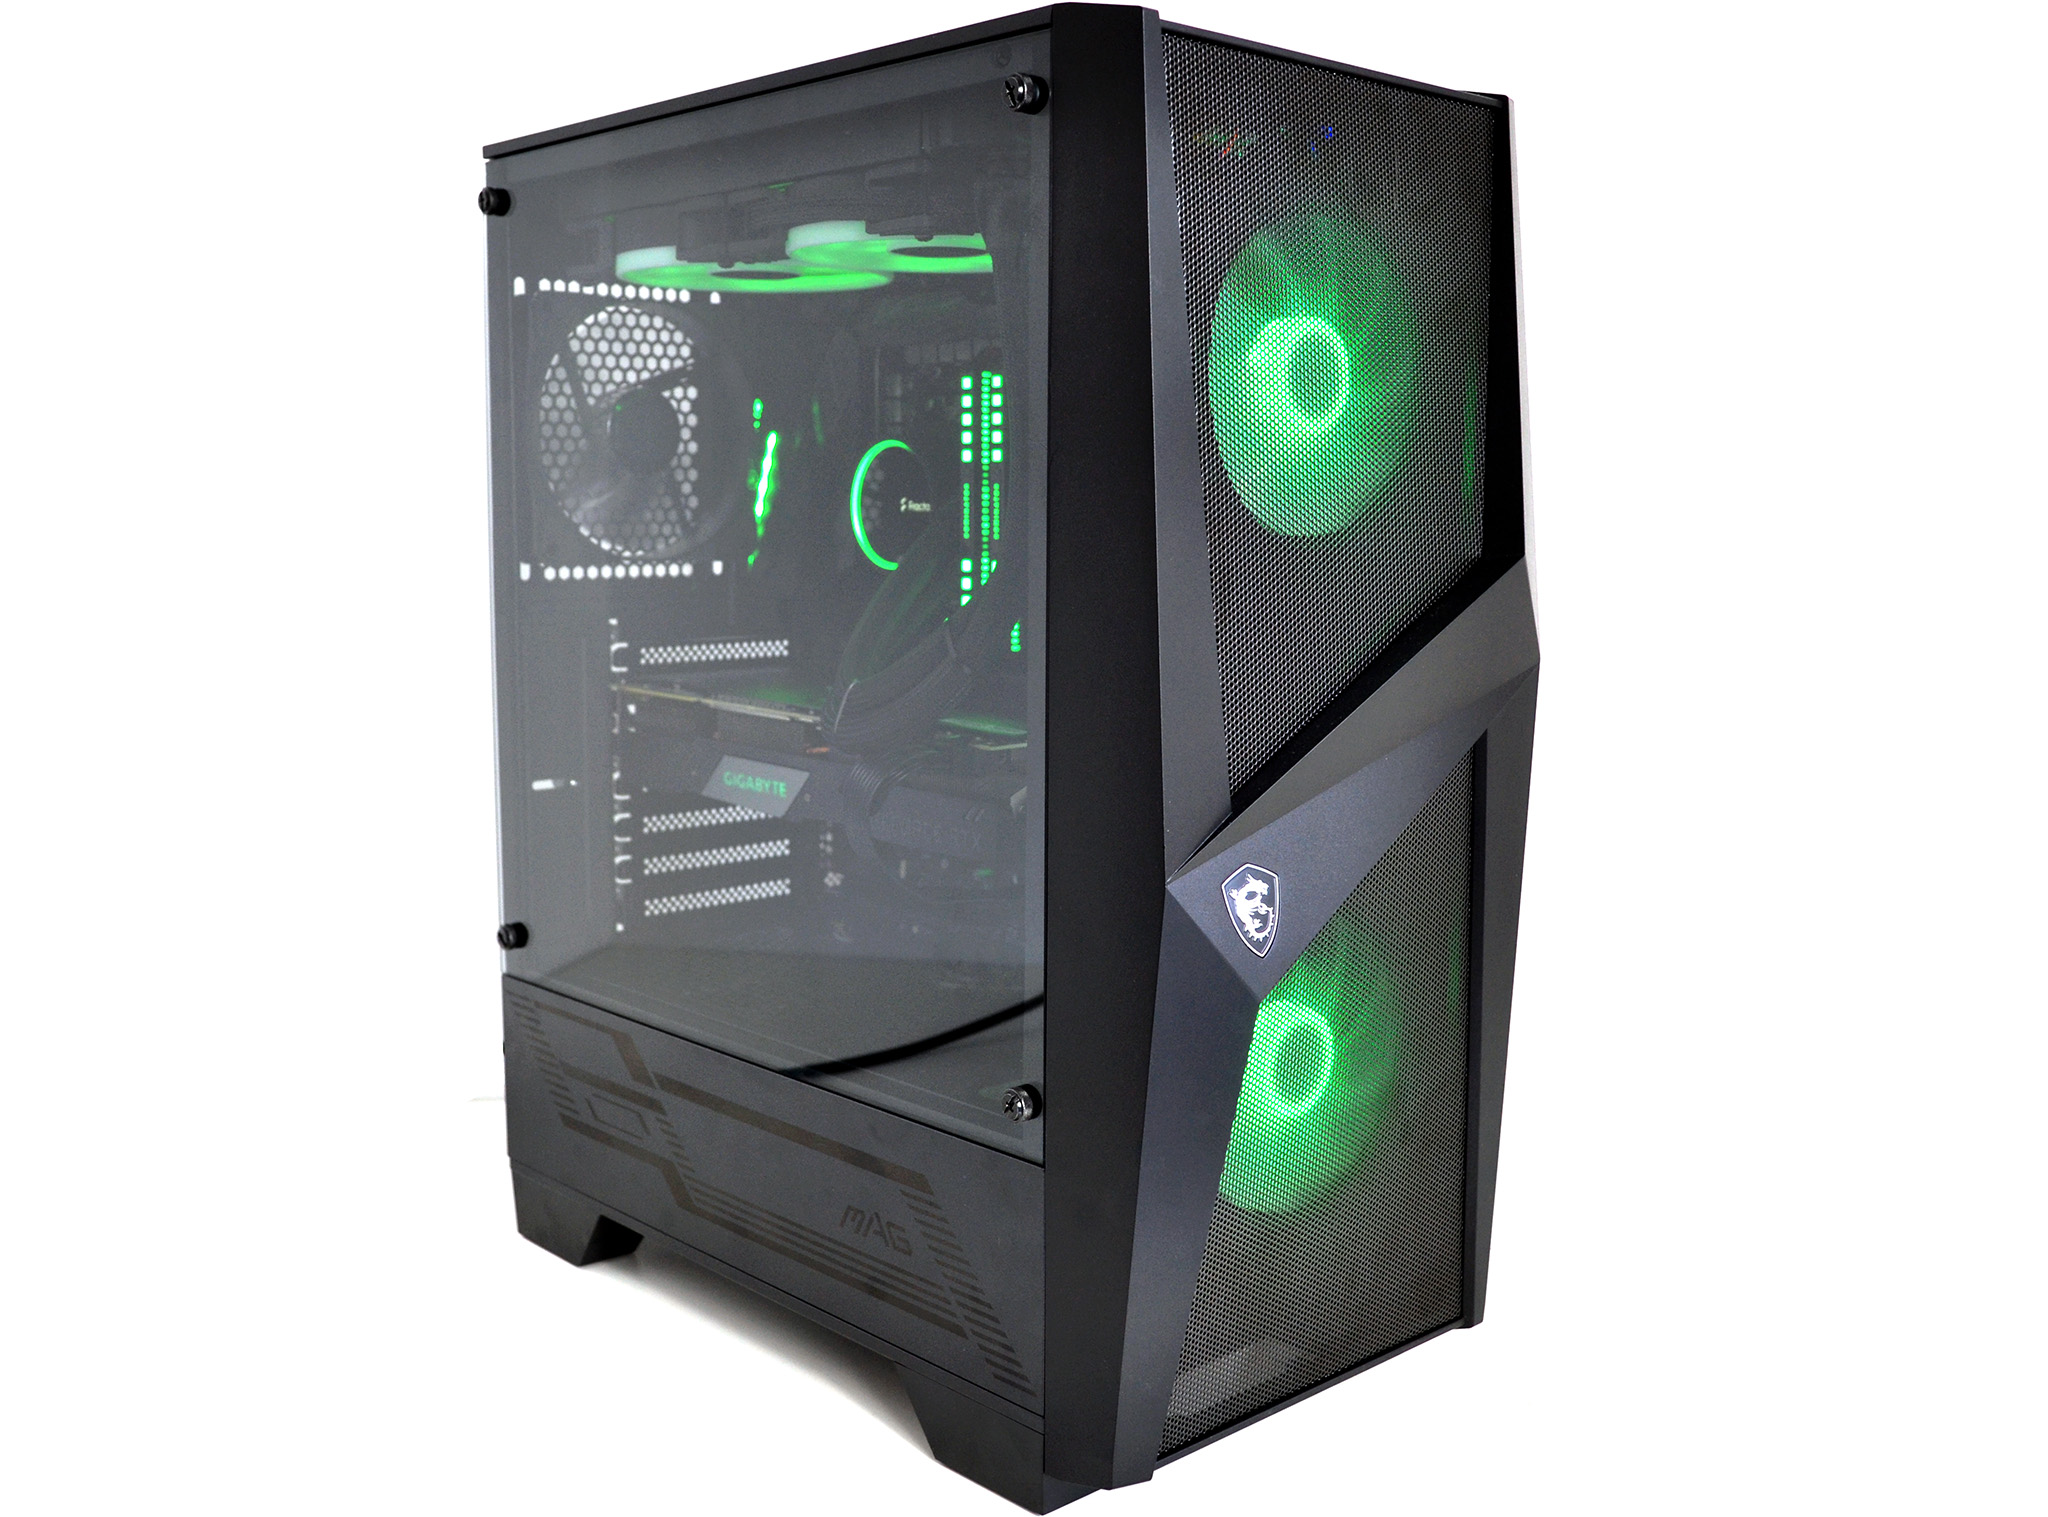 MSI Mid-Tower PC Gaming Case – Tempered Glass Side Panel – 4 x 120mm aRGB  Fan – Liquid Cooling Support up to 240mm Radiator x 1 – MAG Forge 112R